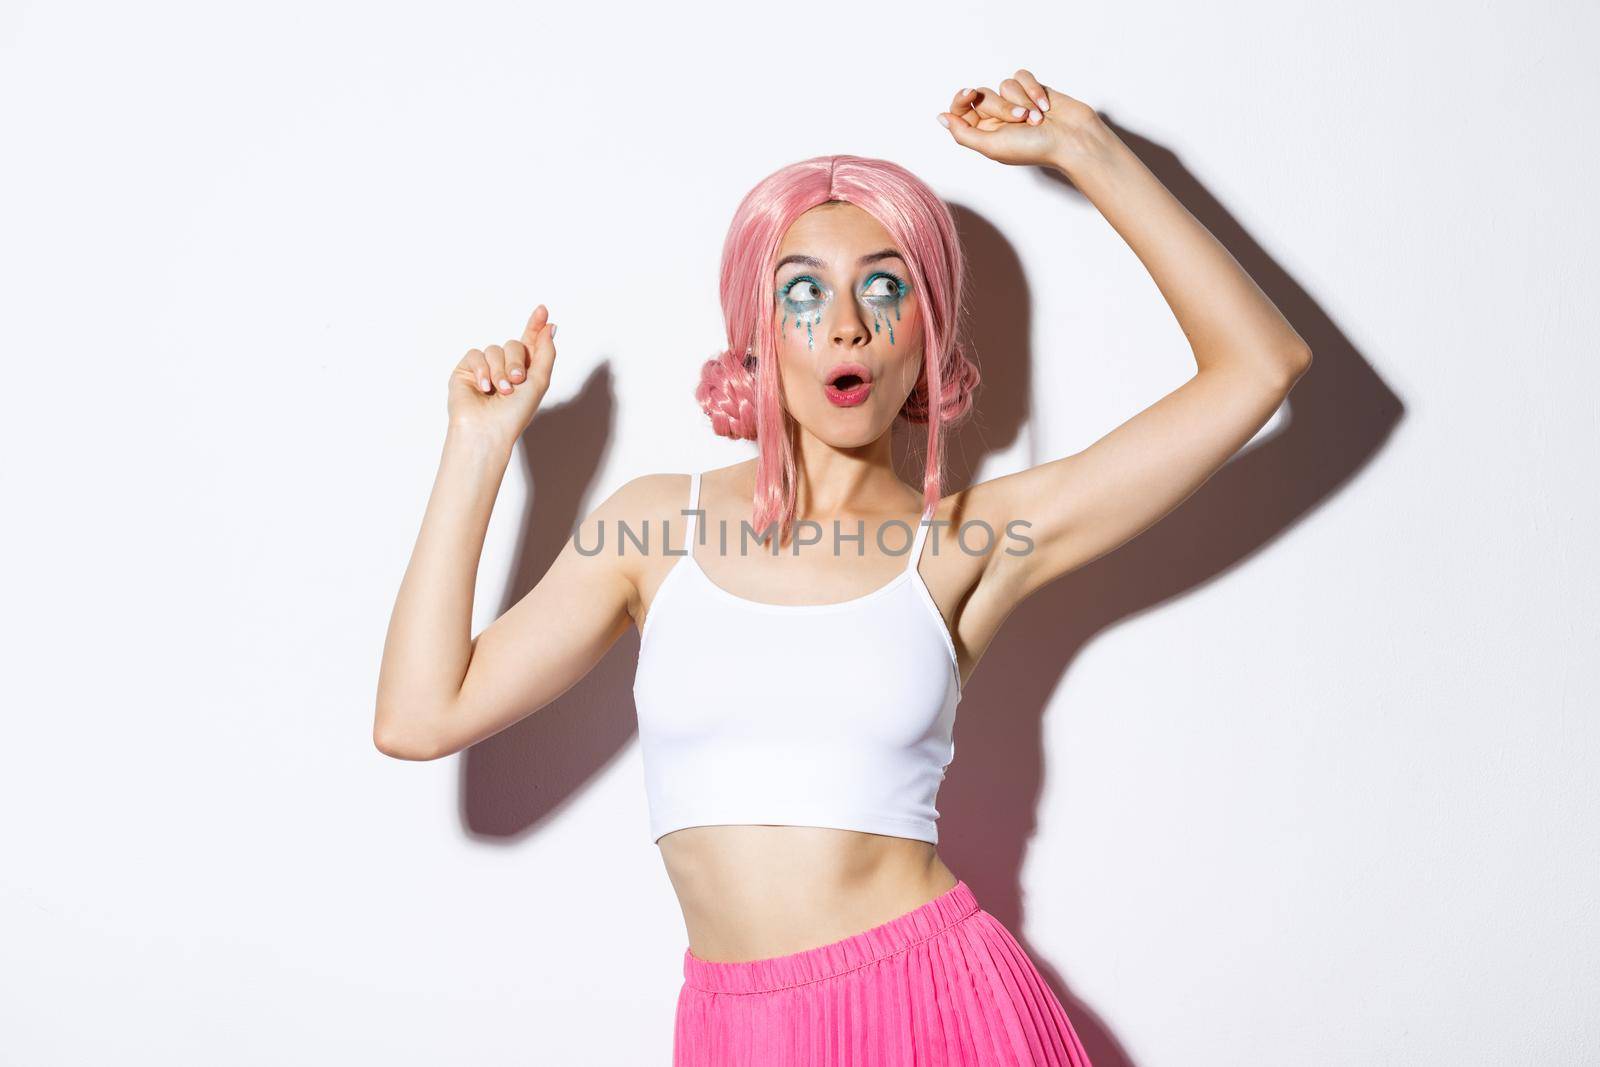 Image of attractive party girl with pink wig and bright makeup, having fun and celebrating holiday, dancing happy over white background.